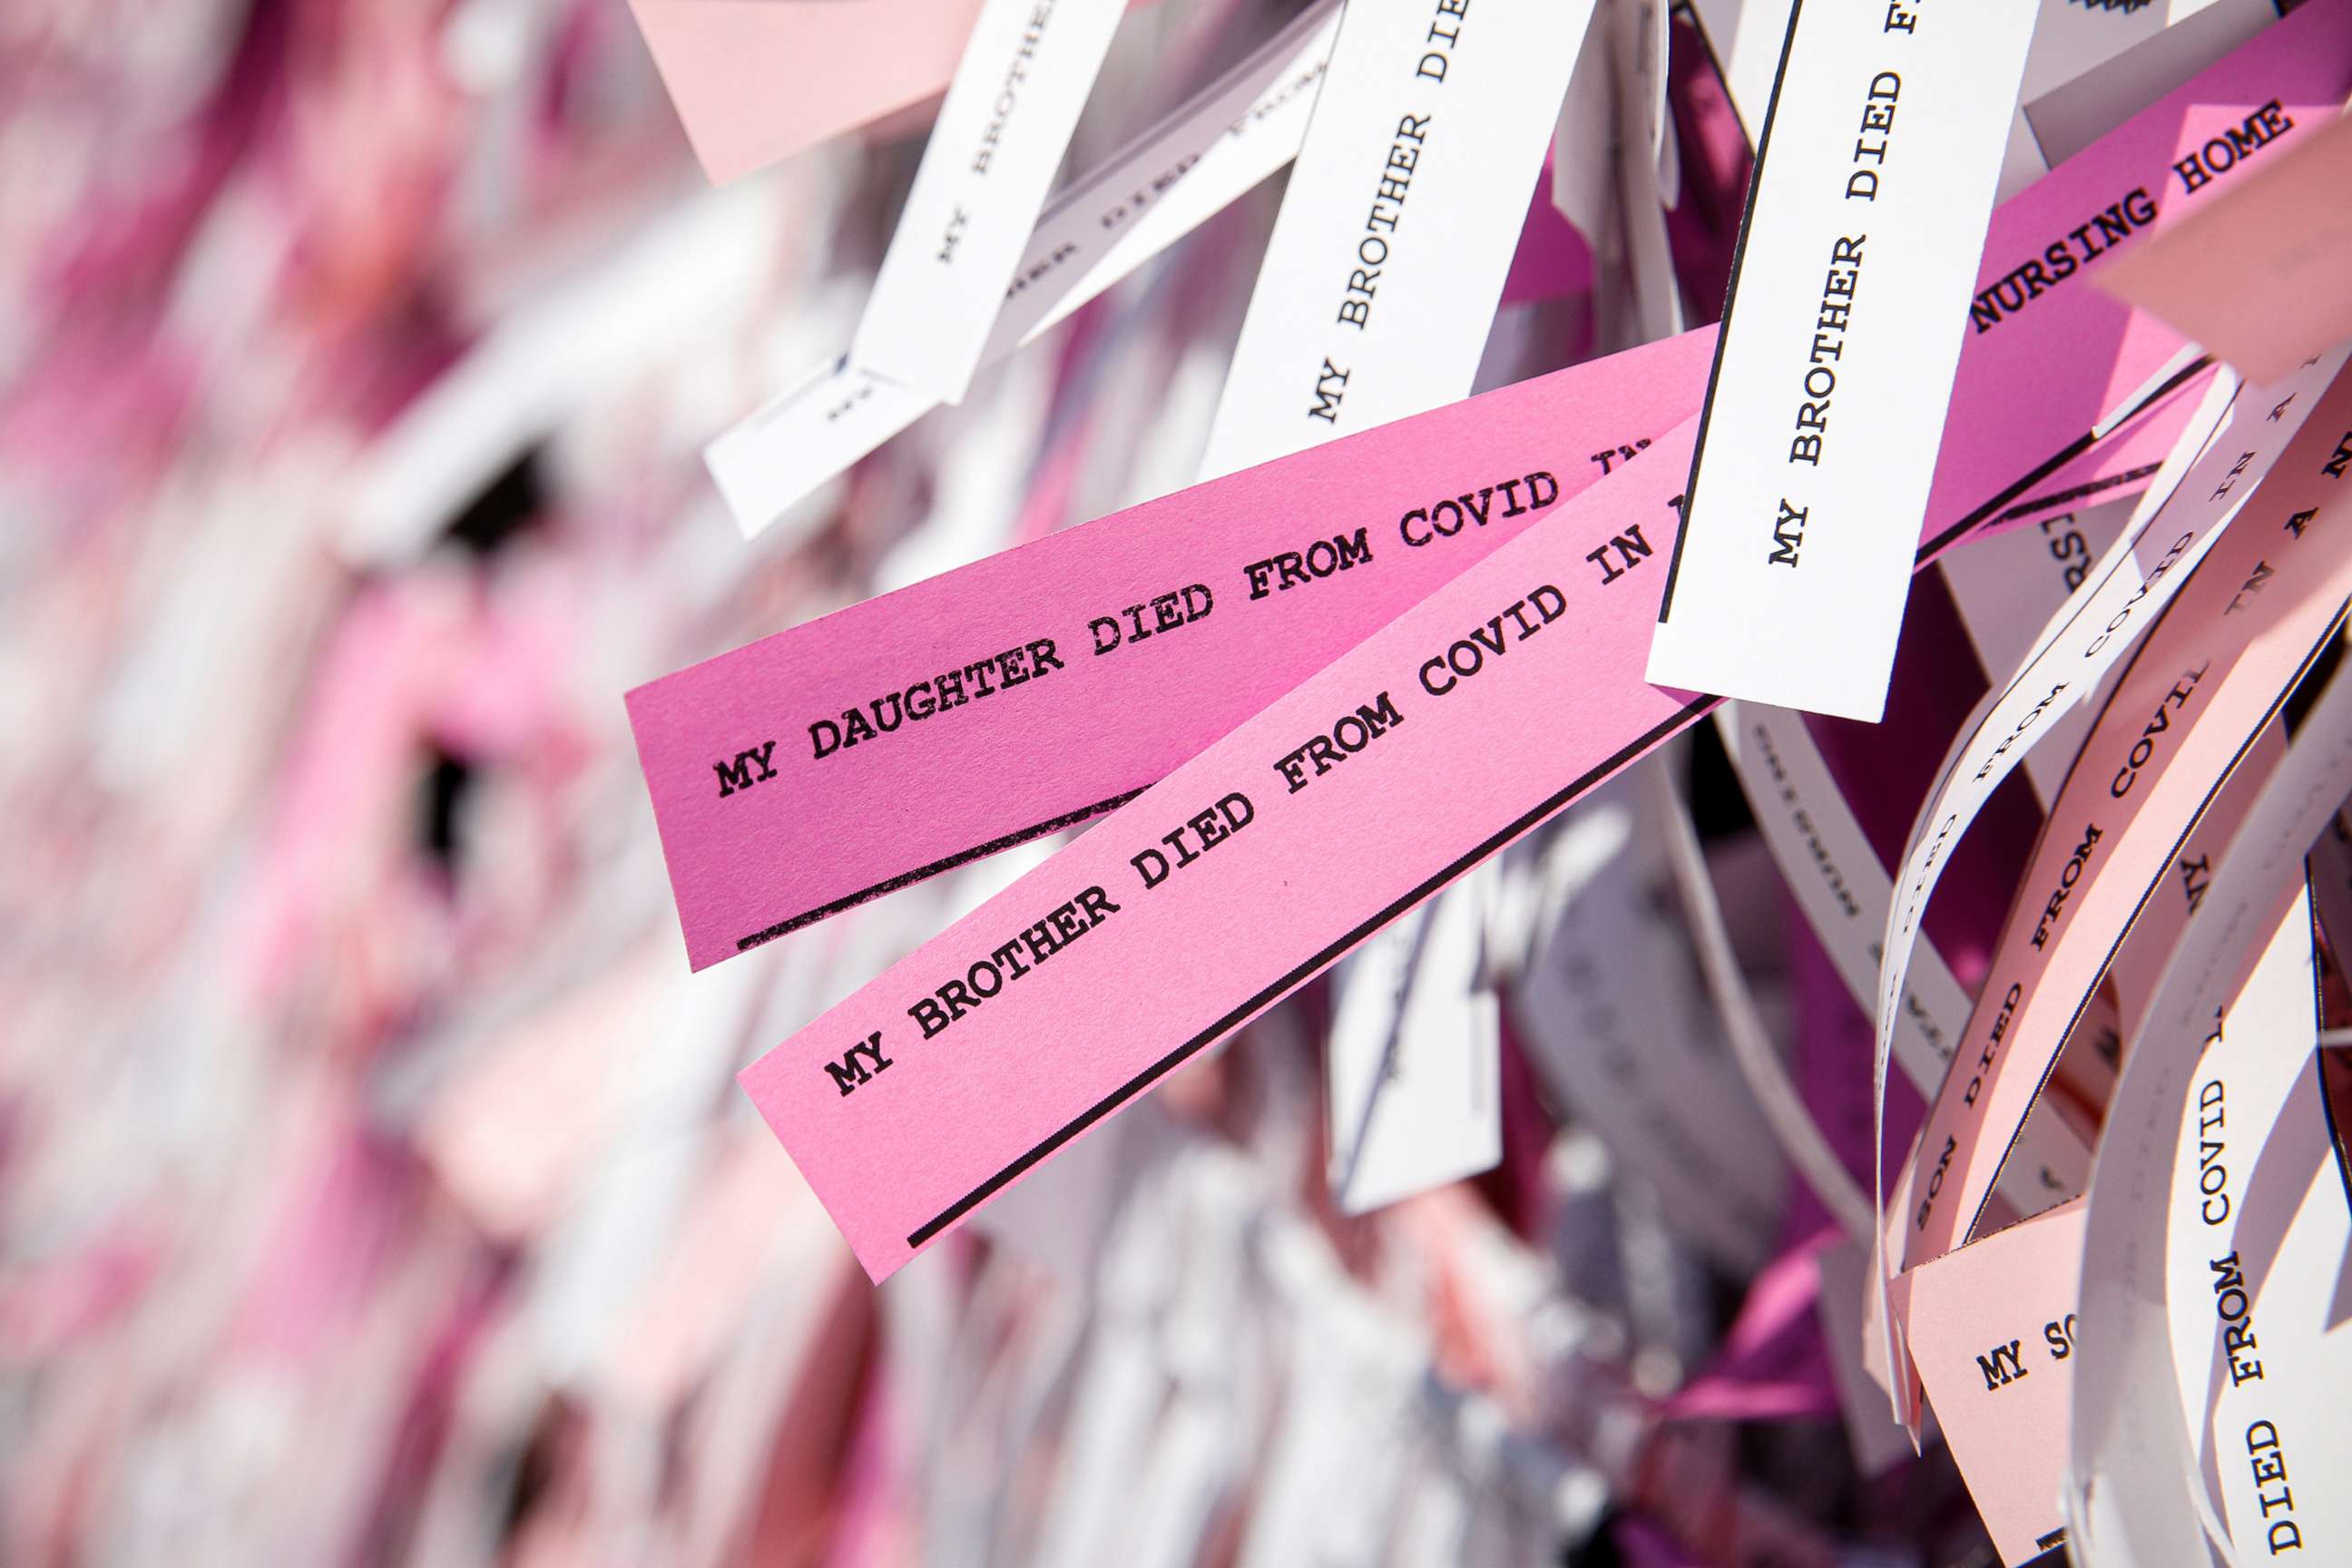 PHOTO: Messages are seen on ribbons as part of the "Naming the Lost Memorials," as the U.S. deaths from COVID-19 are expected to surpass 600,000, at The Green-Wood Cemetery in Brooklyn, N.Y., June 10, 2021. 